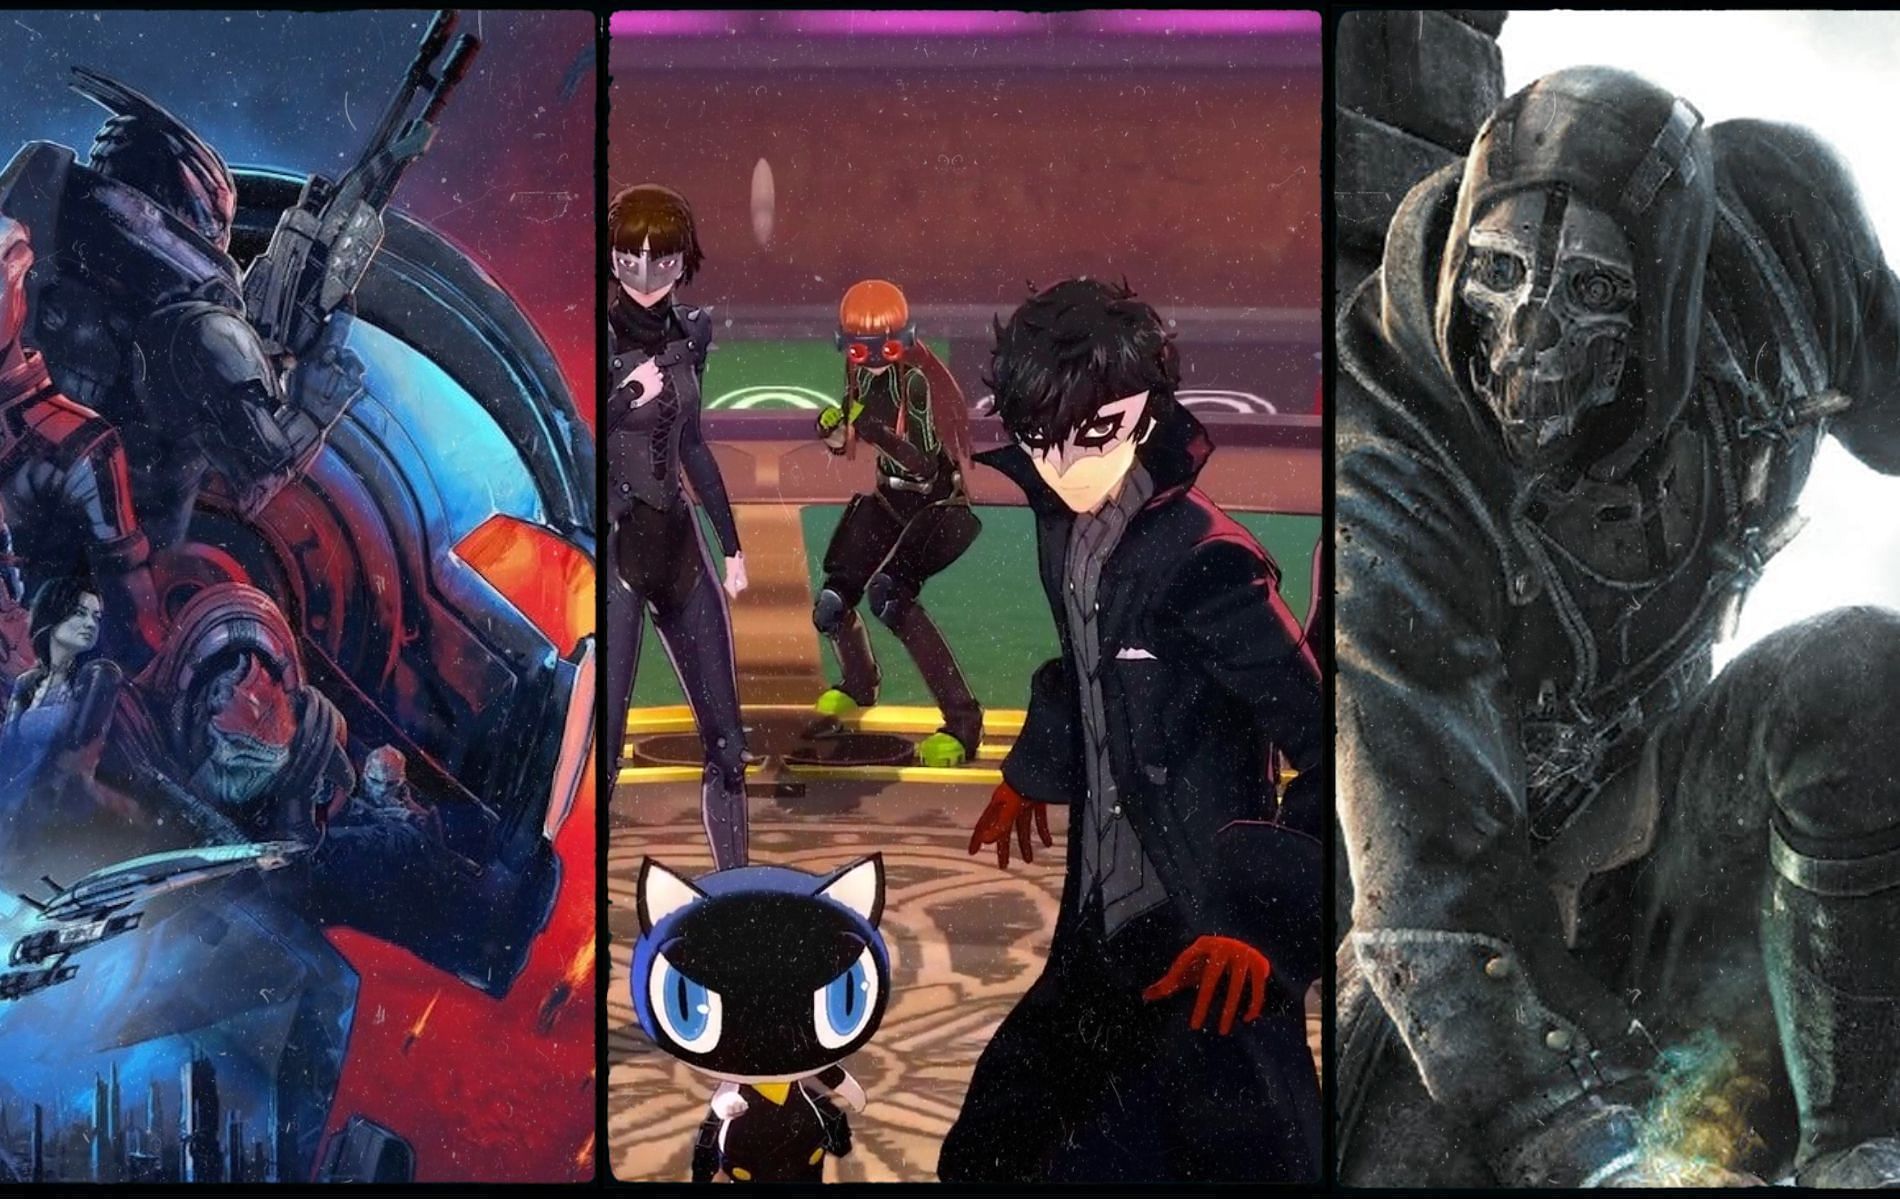 Images from Mass Effect Legendary Edition, Persona 5 and Dishonored